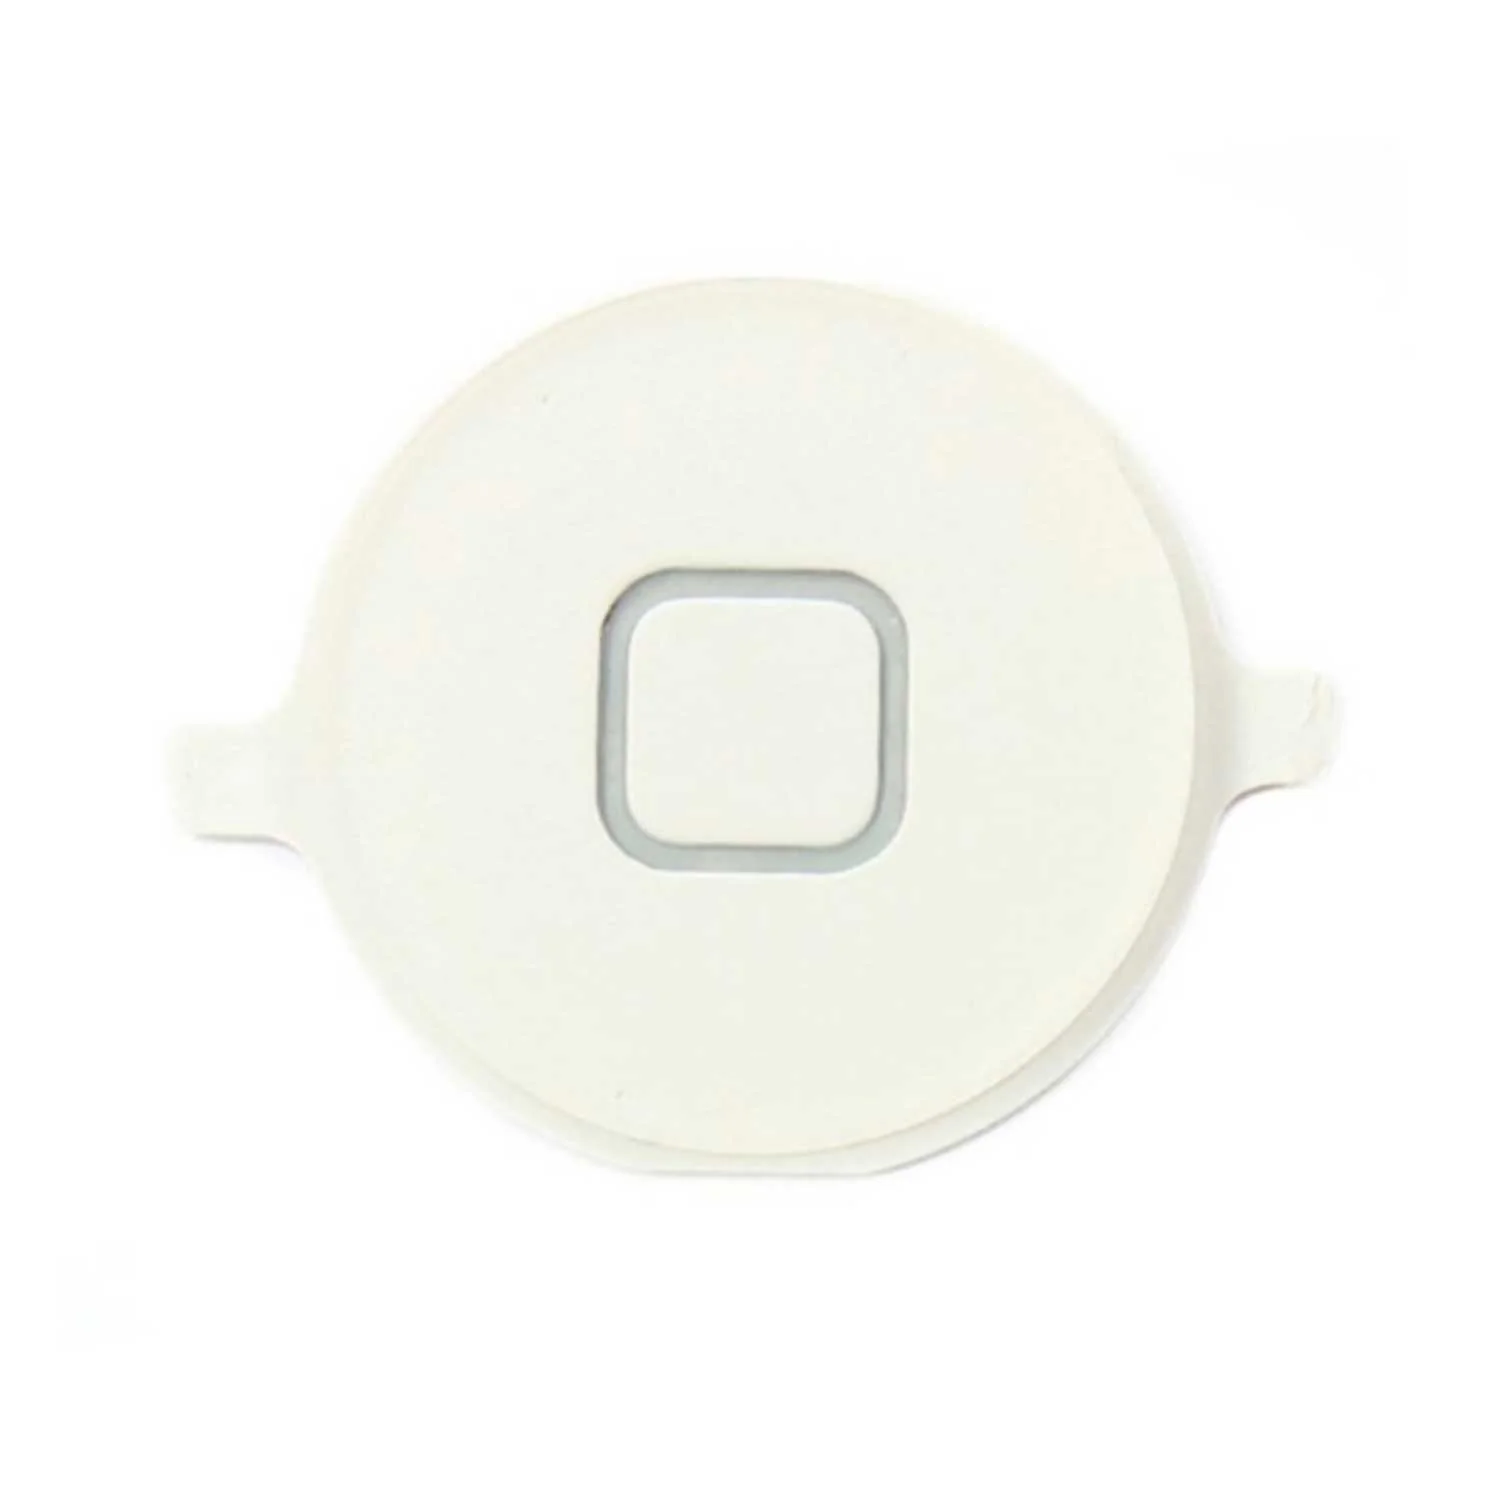 Bouton Home Apple iPhone 4S Blanc